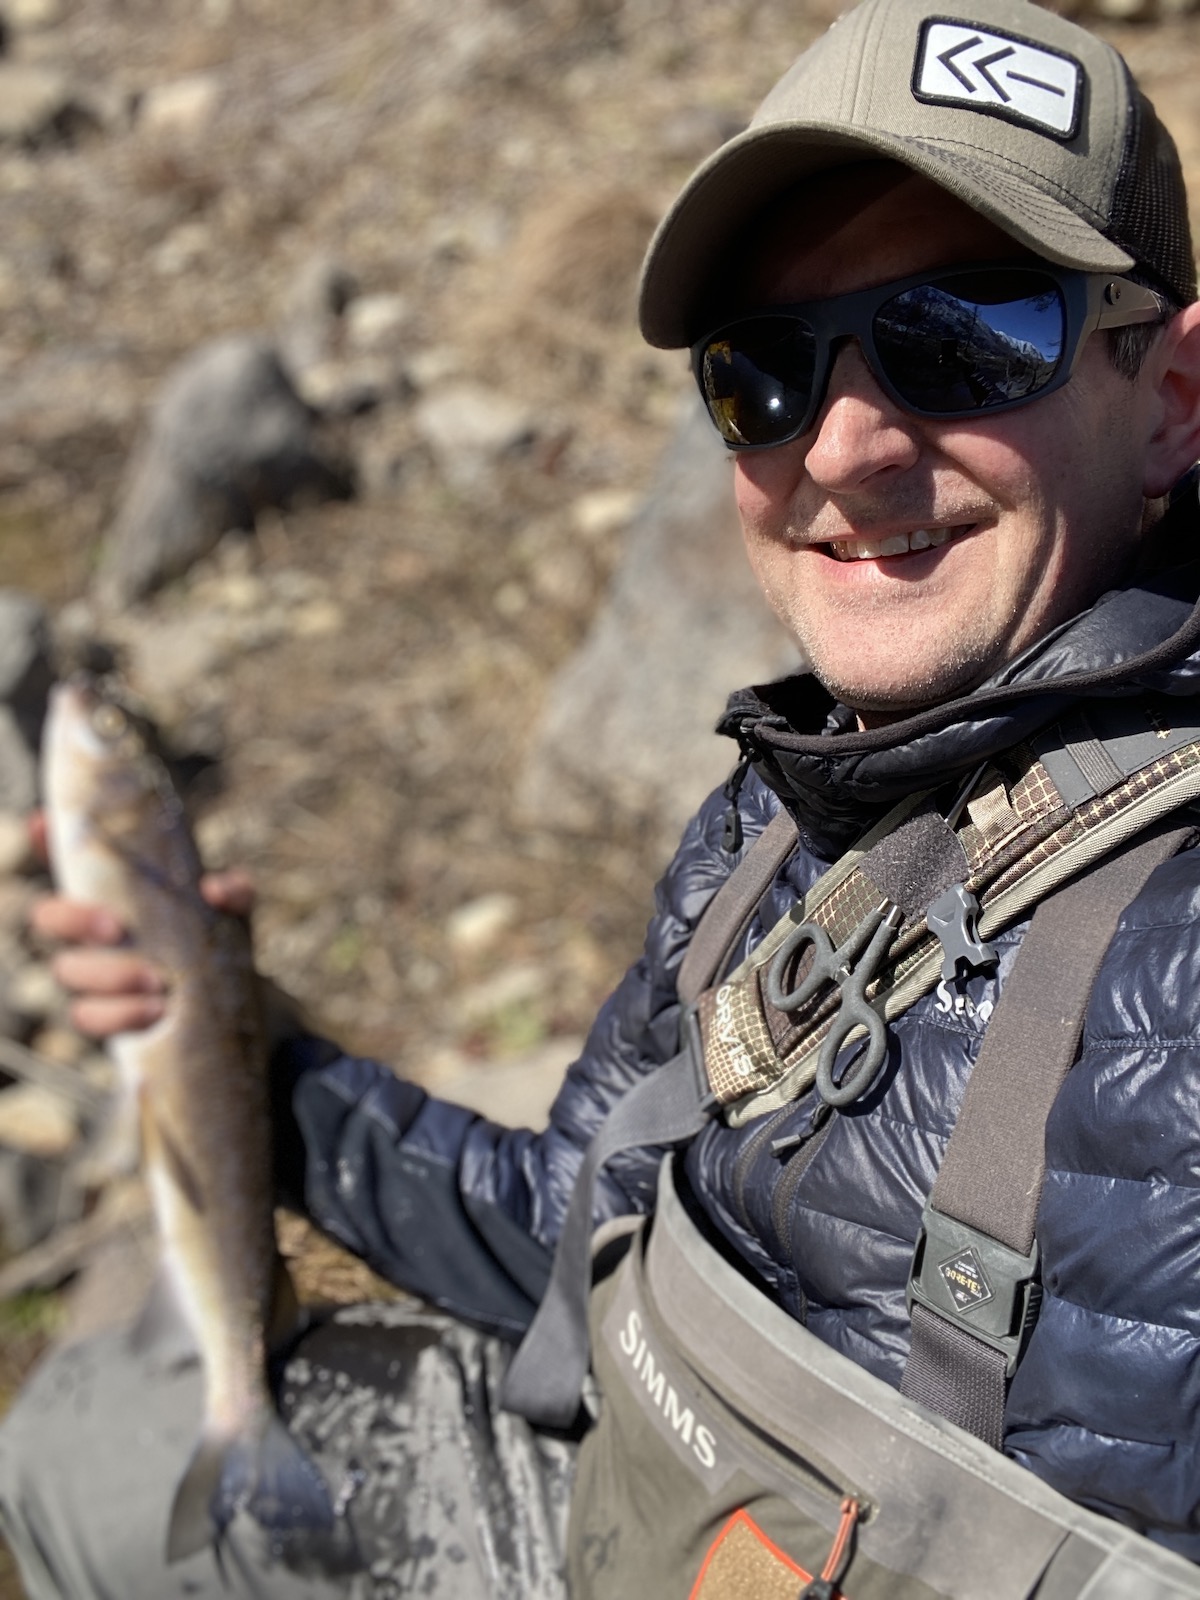 Fly fishing for whitefish on an Idaho river